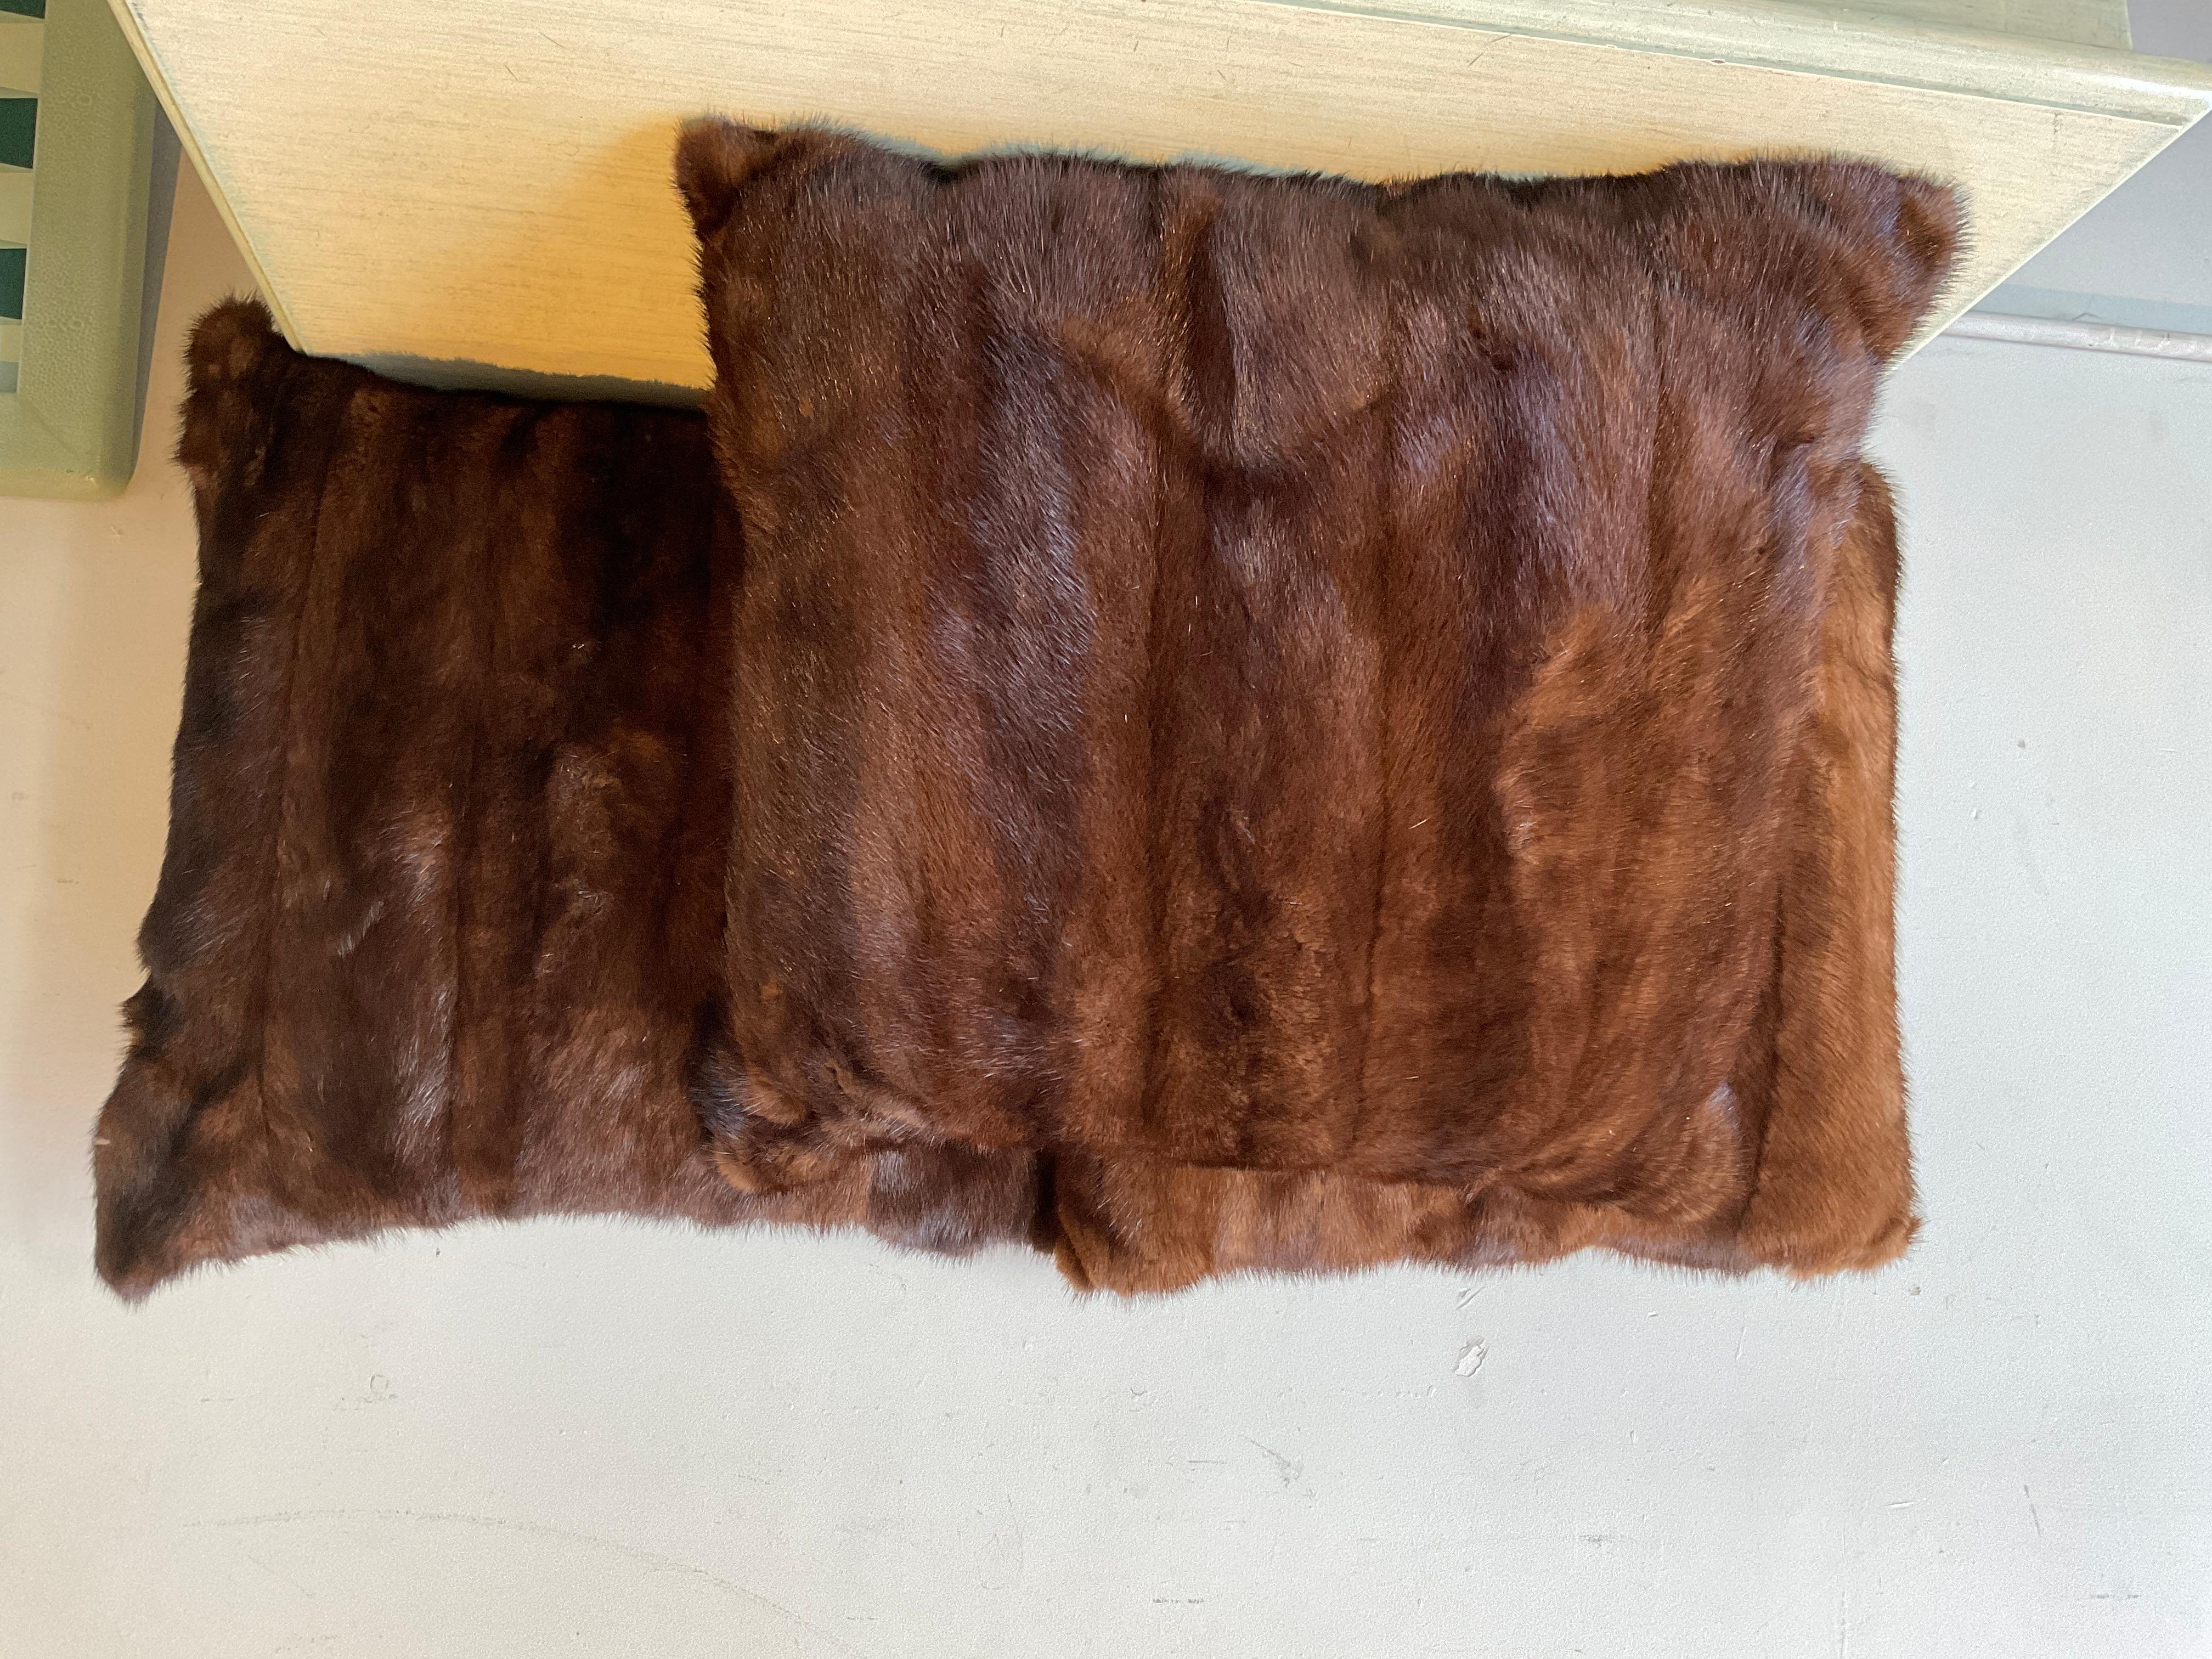 3 mink pillows. Down insert, zippered pillow.
Pillows are being sold at 700 dollars each.